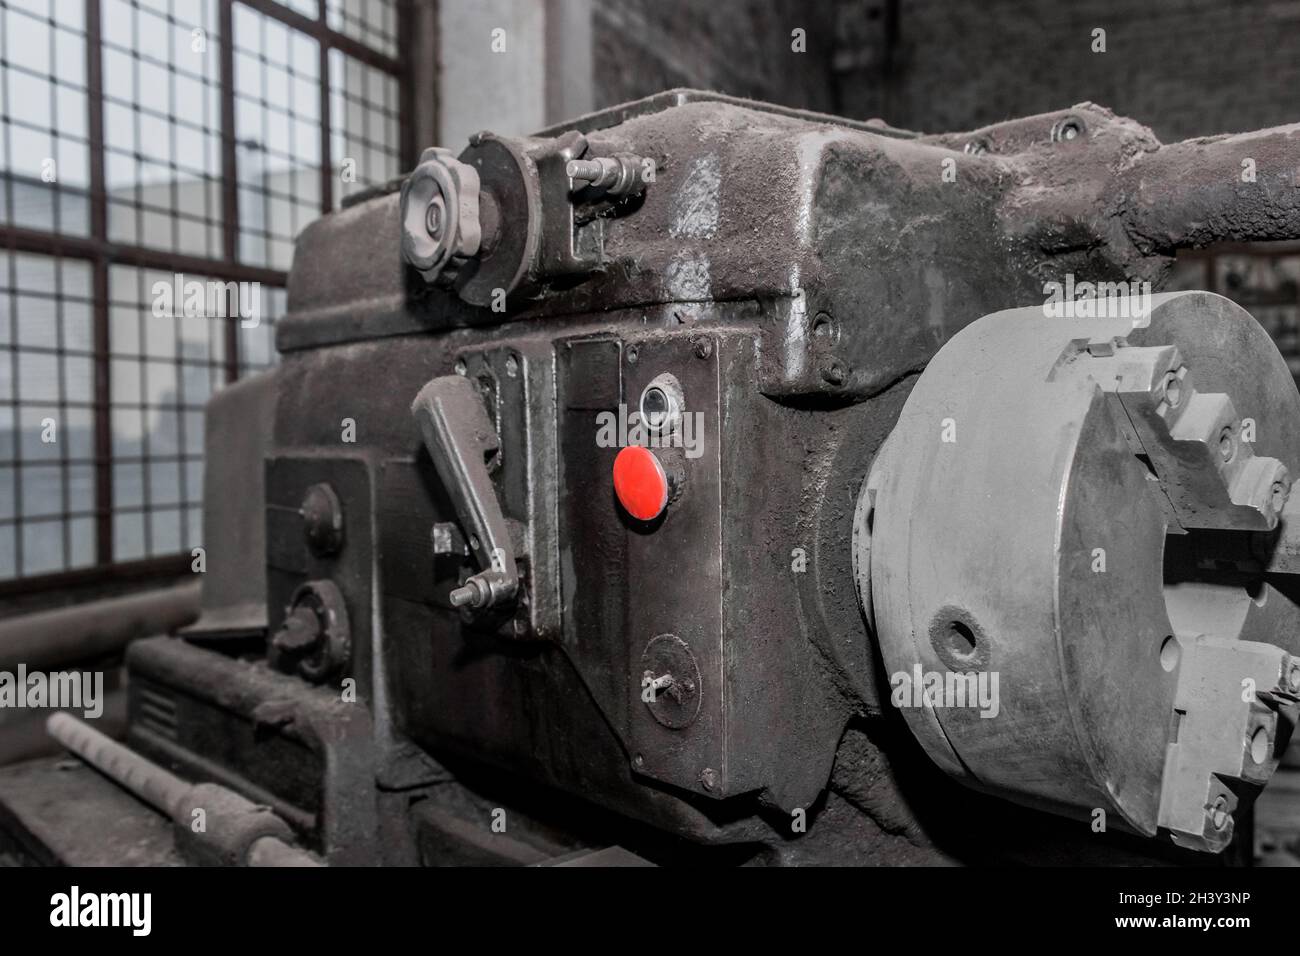 Red start button for controlling old milling machine equipment in the workshop at the industrial plant. Stock Photo